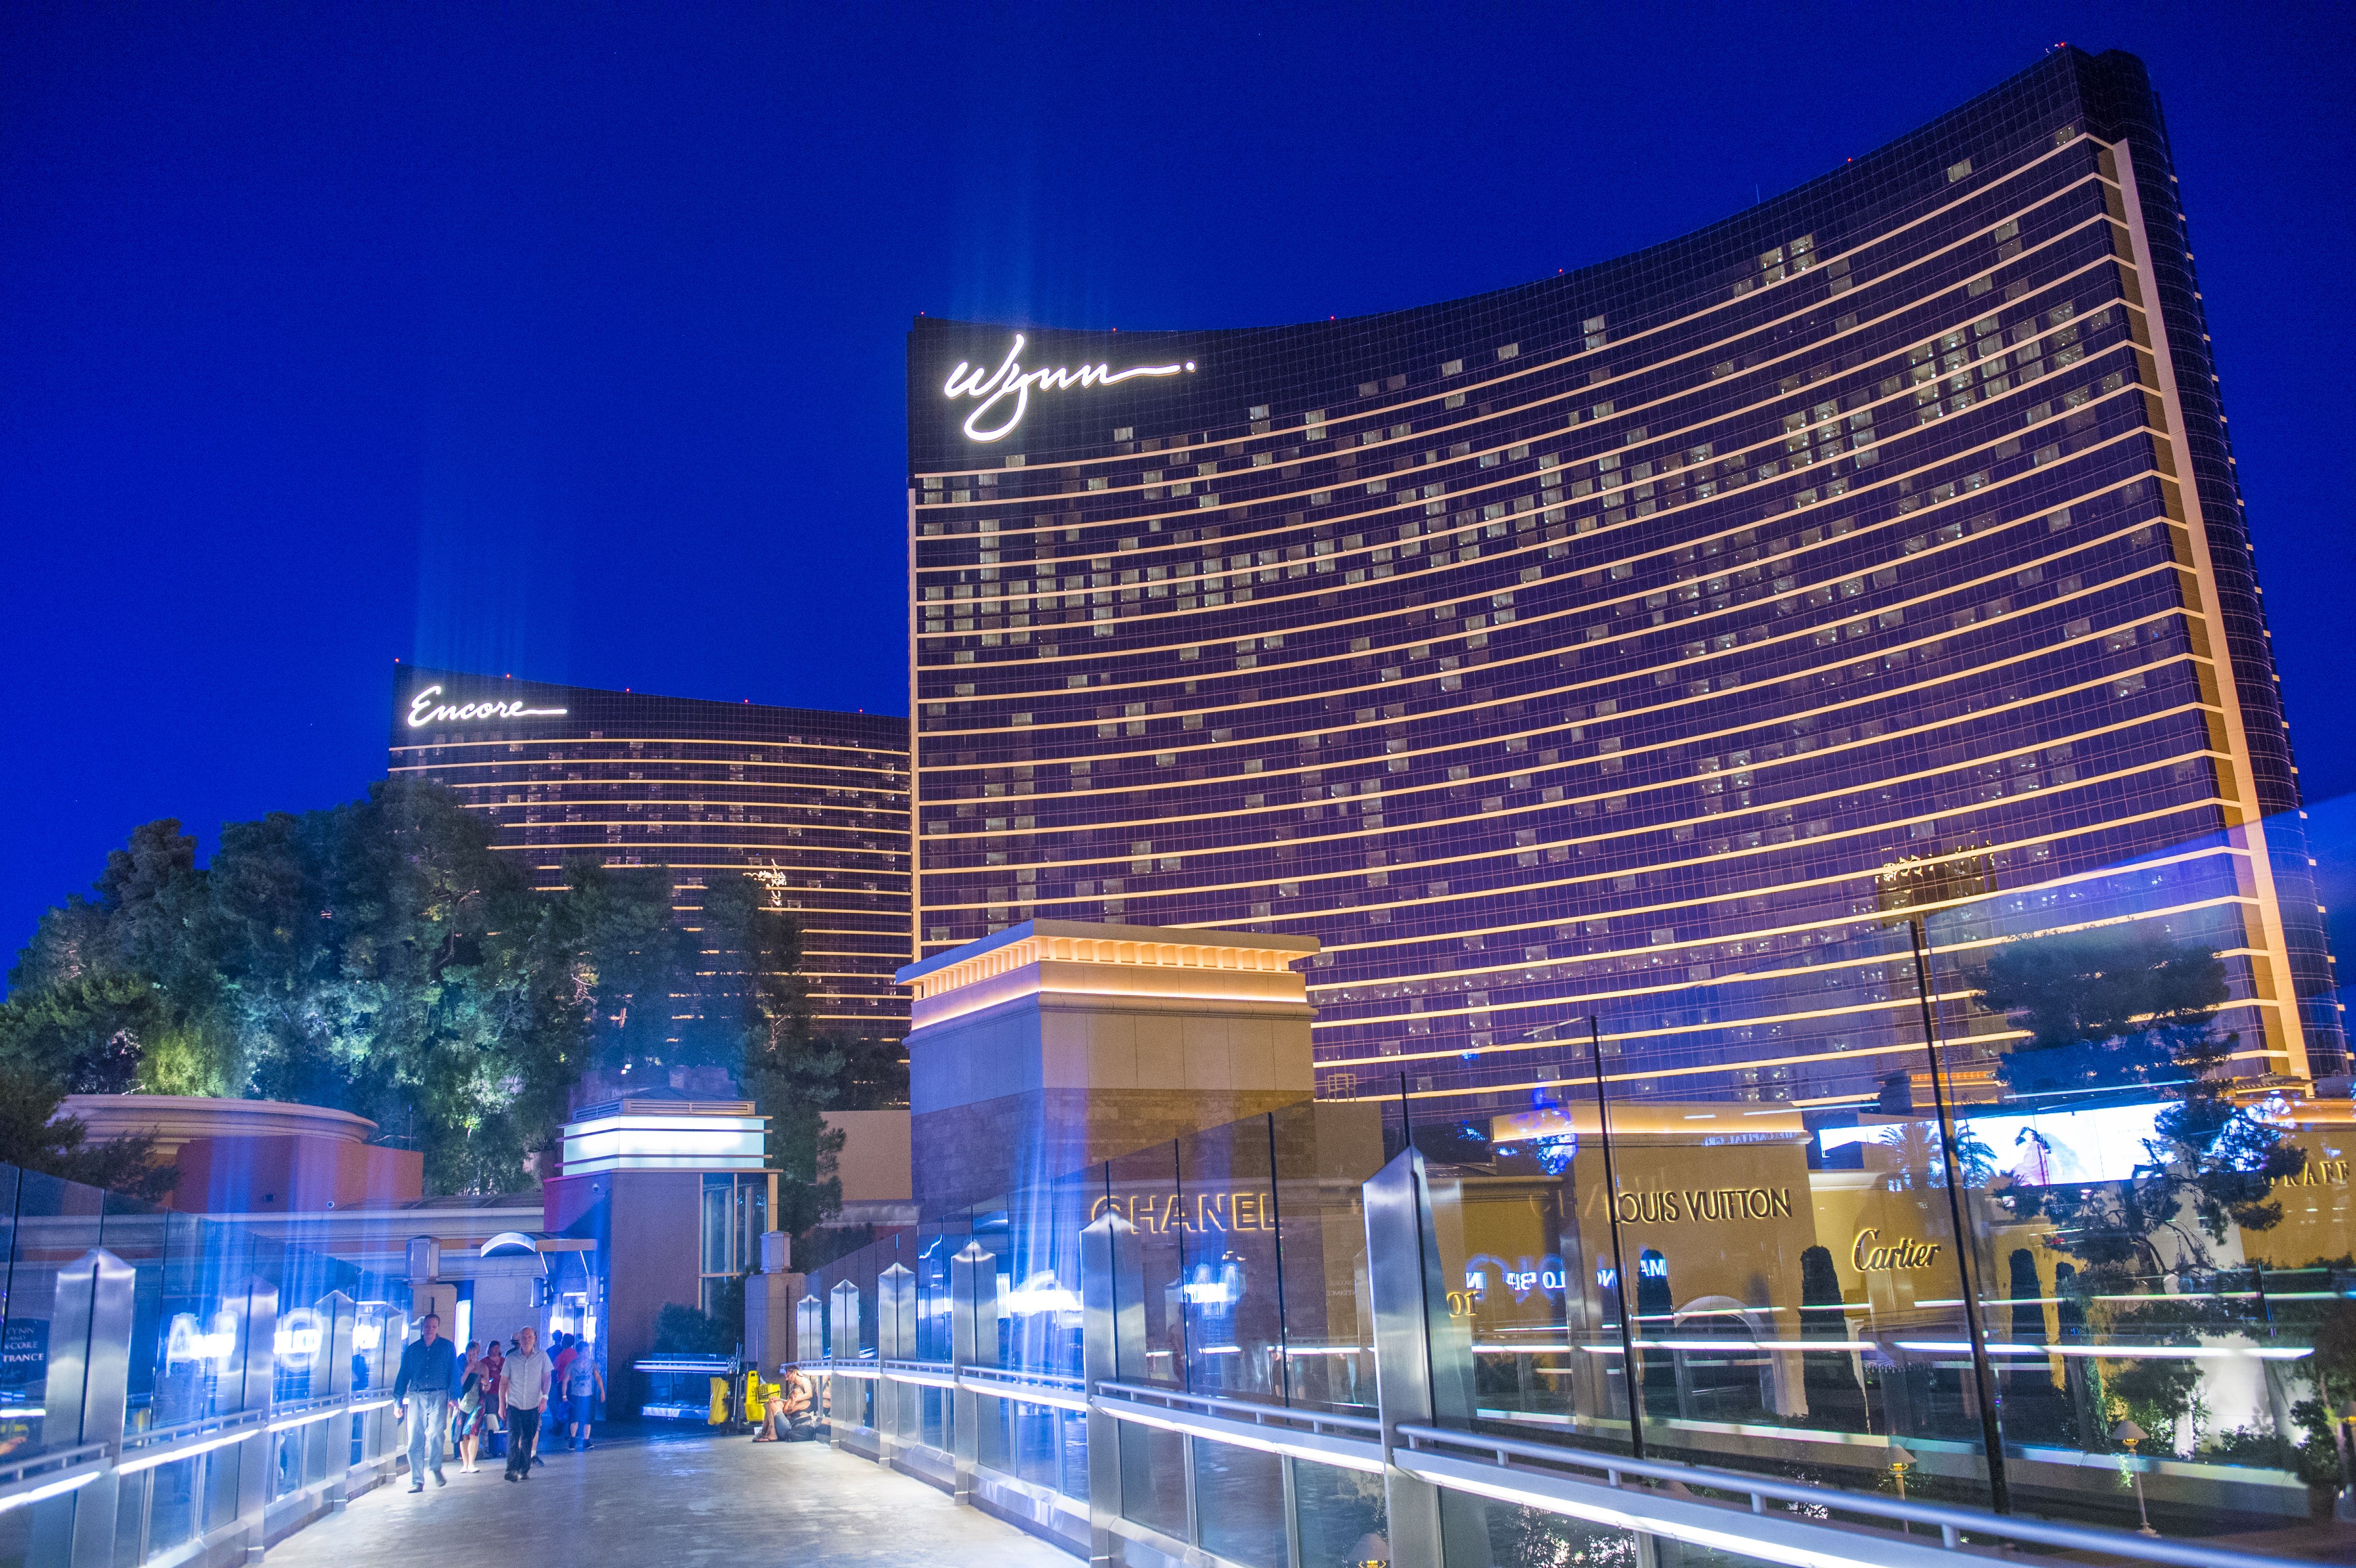 The Wynn and Encore hotels, with Chanel, Louis Vuiton, and Cartier shops in Las Vegas